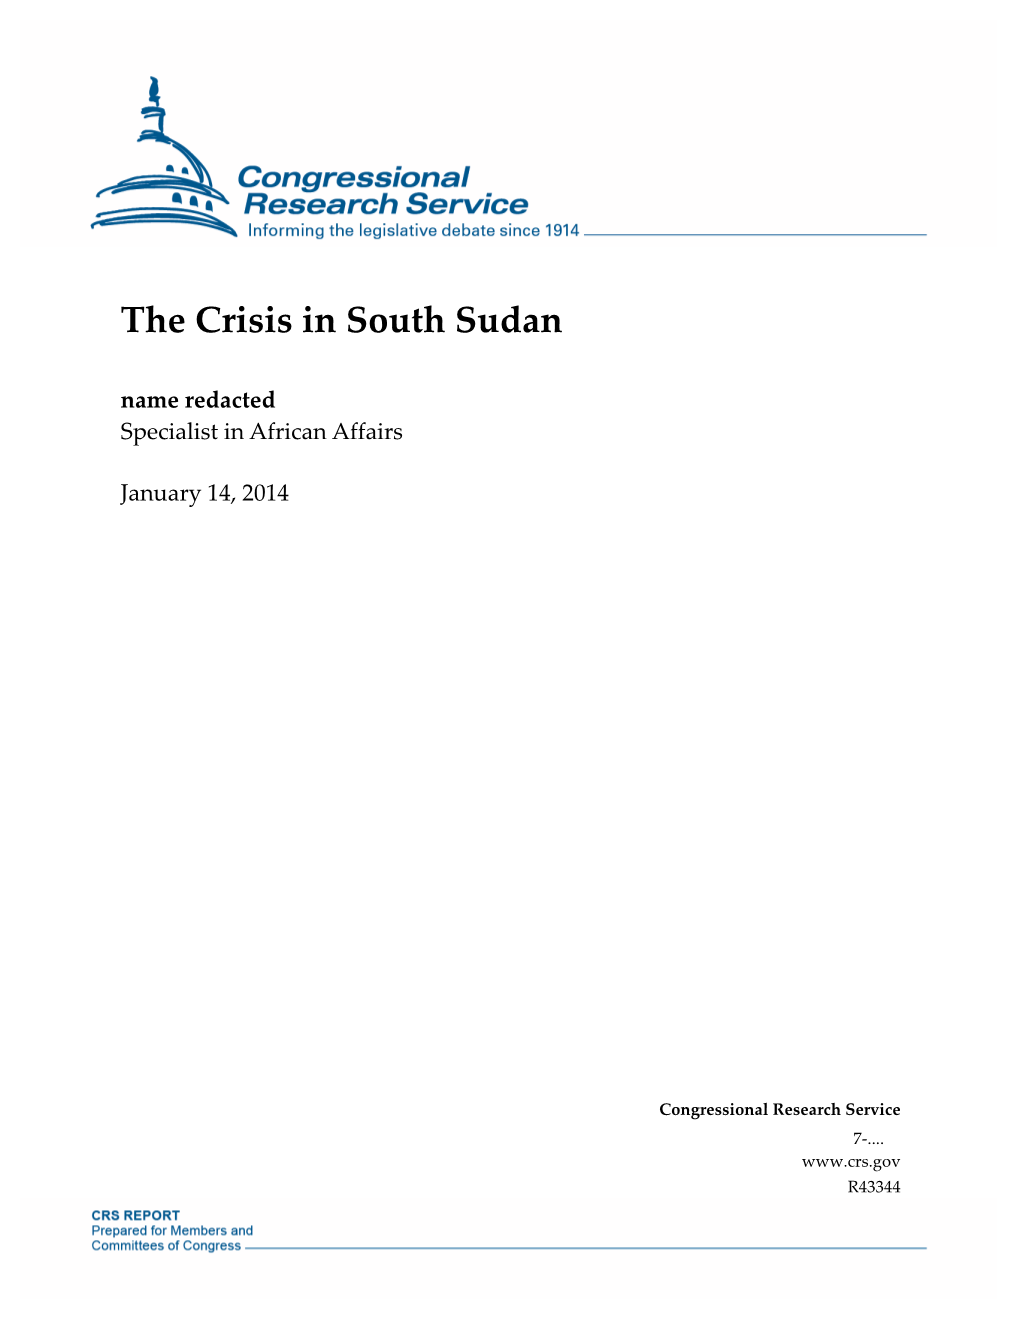 The Crisis in South Sudan Name Redacted Specialist in African Affairs